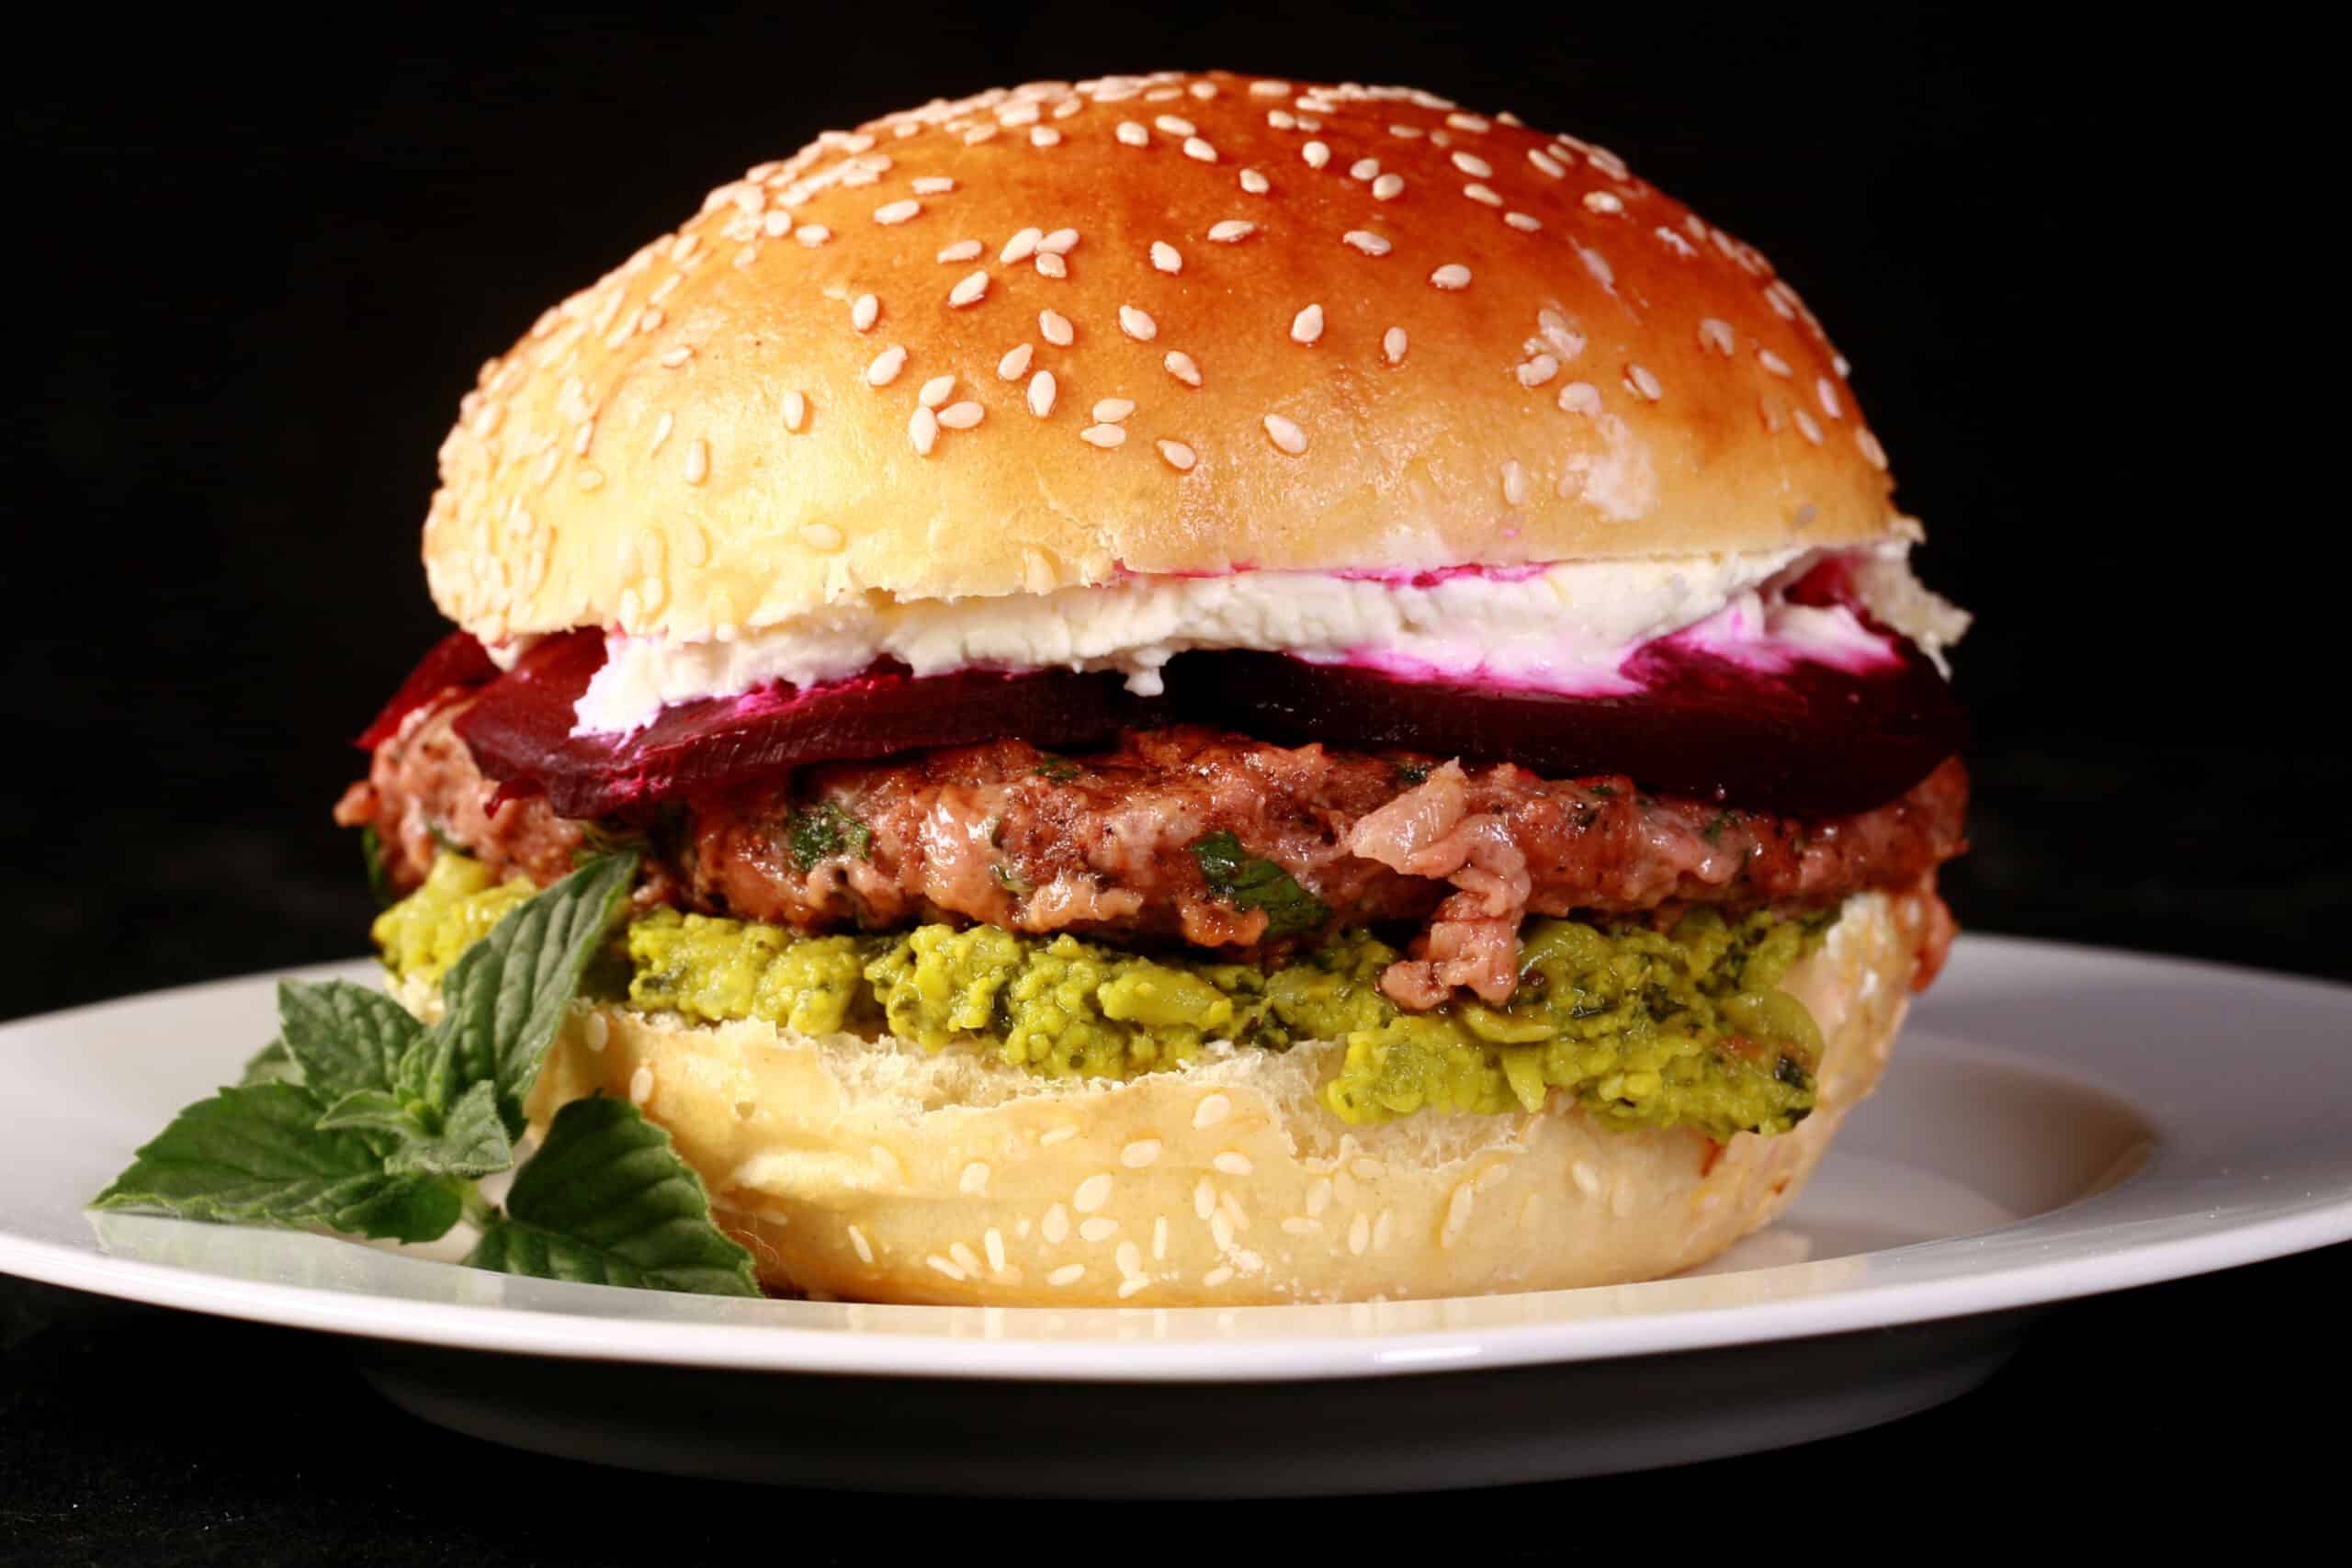 A spiced vegetarian burger with pea hummus, beet slices, and goat cheese, on a sesame bun.